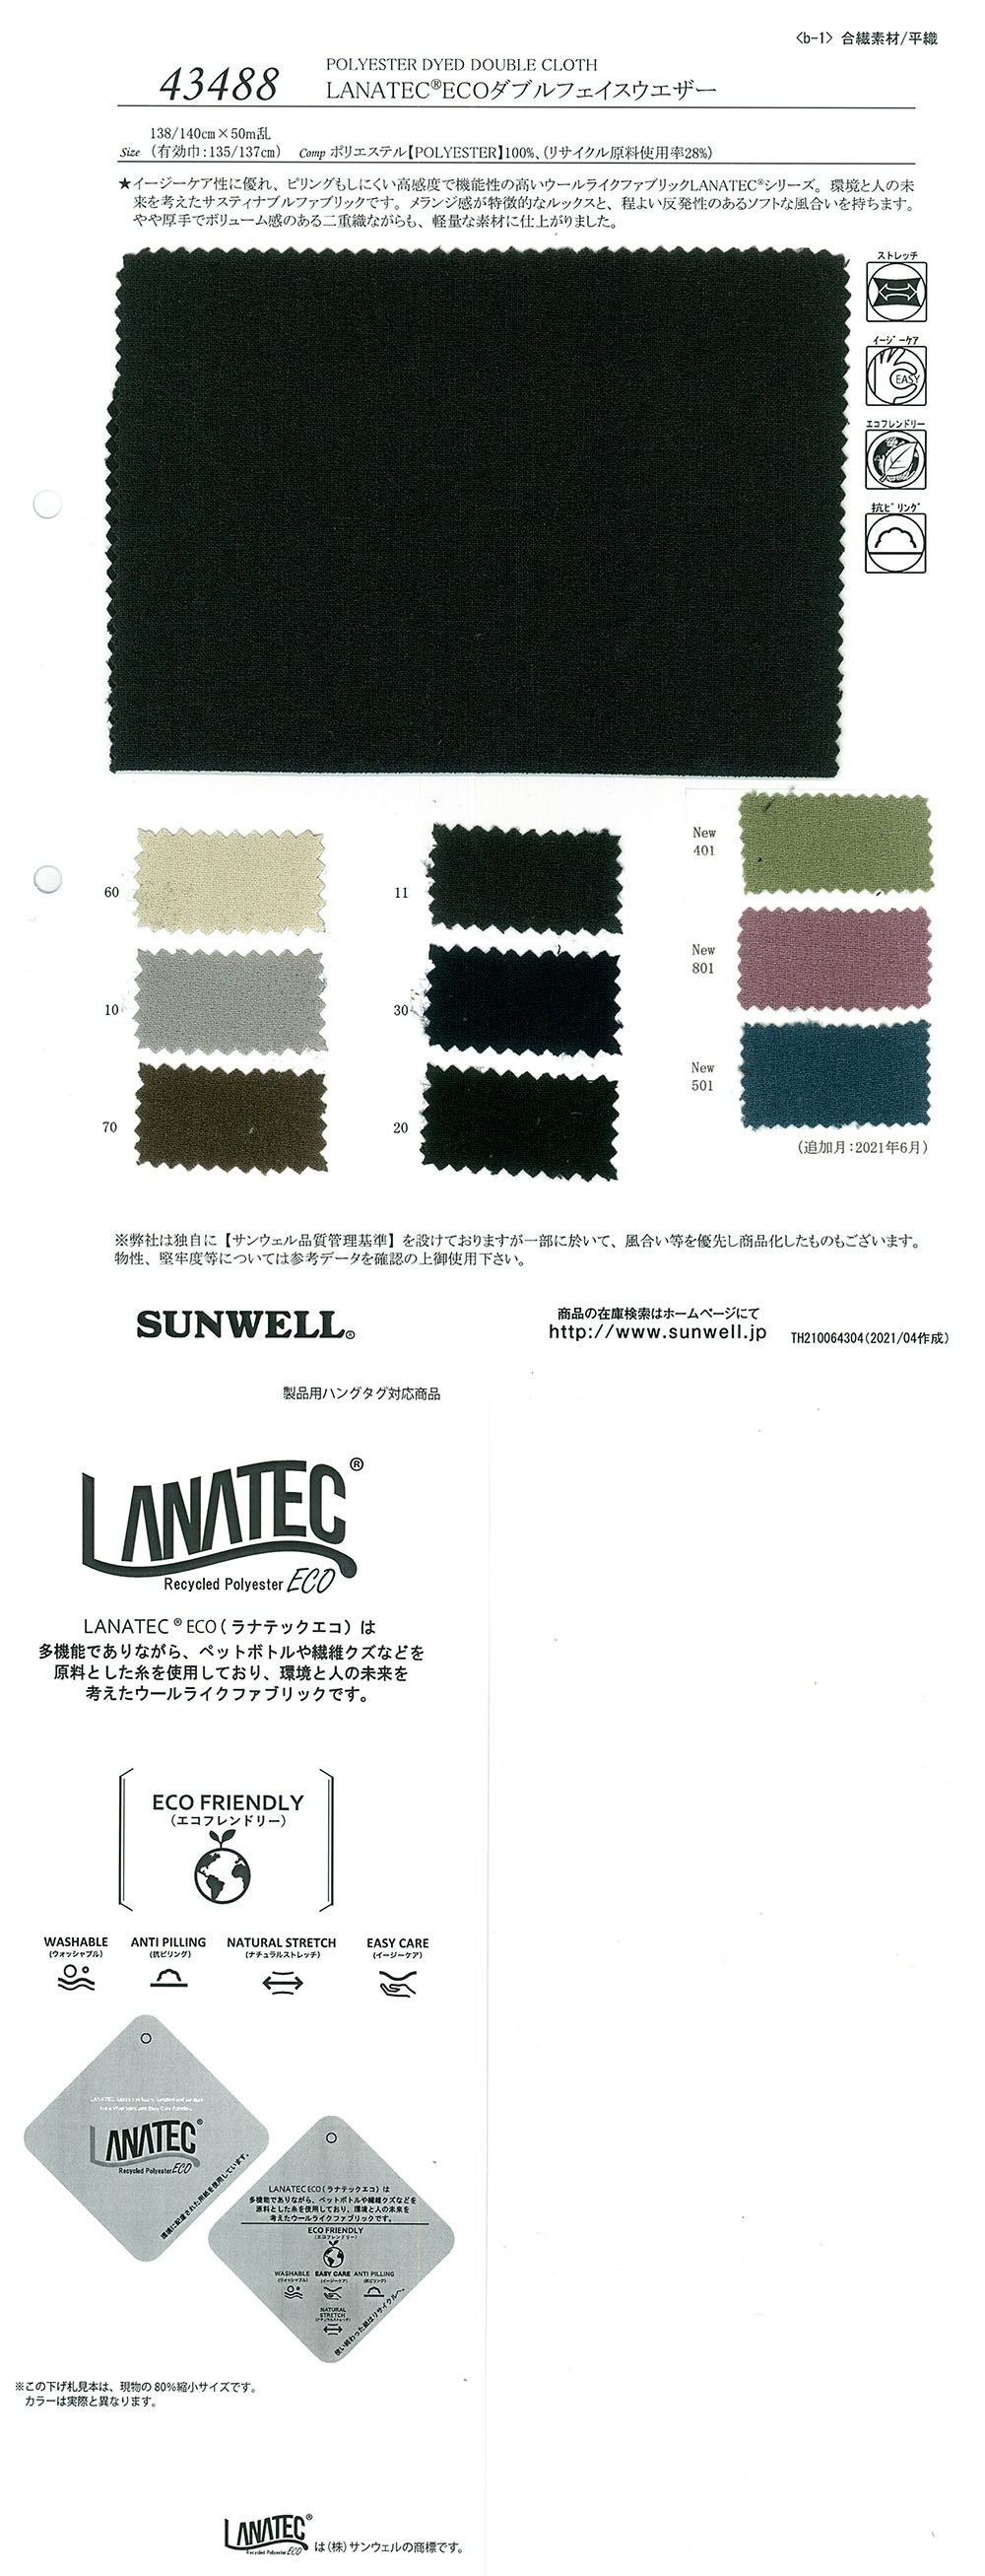 43488 LANATEC(R) ECO Double Face Weather[Textilgewebe] SUNWELL